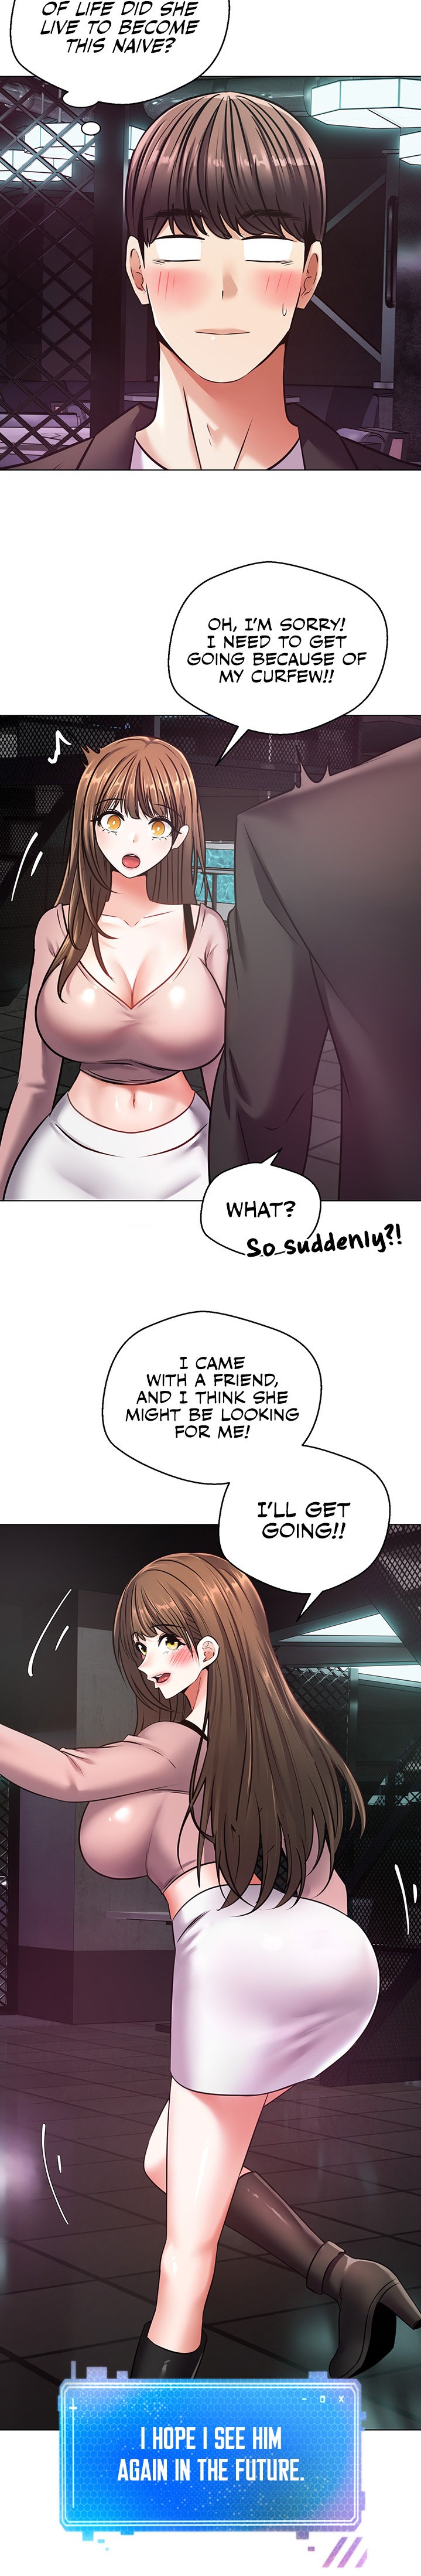 Desire Realization App - Chapter 10 Page 18